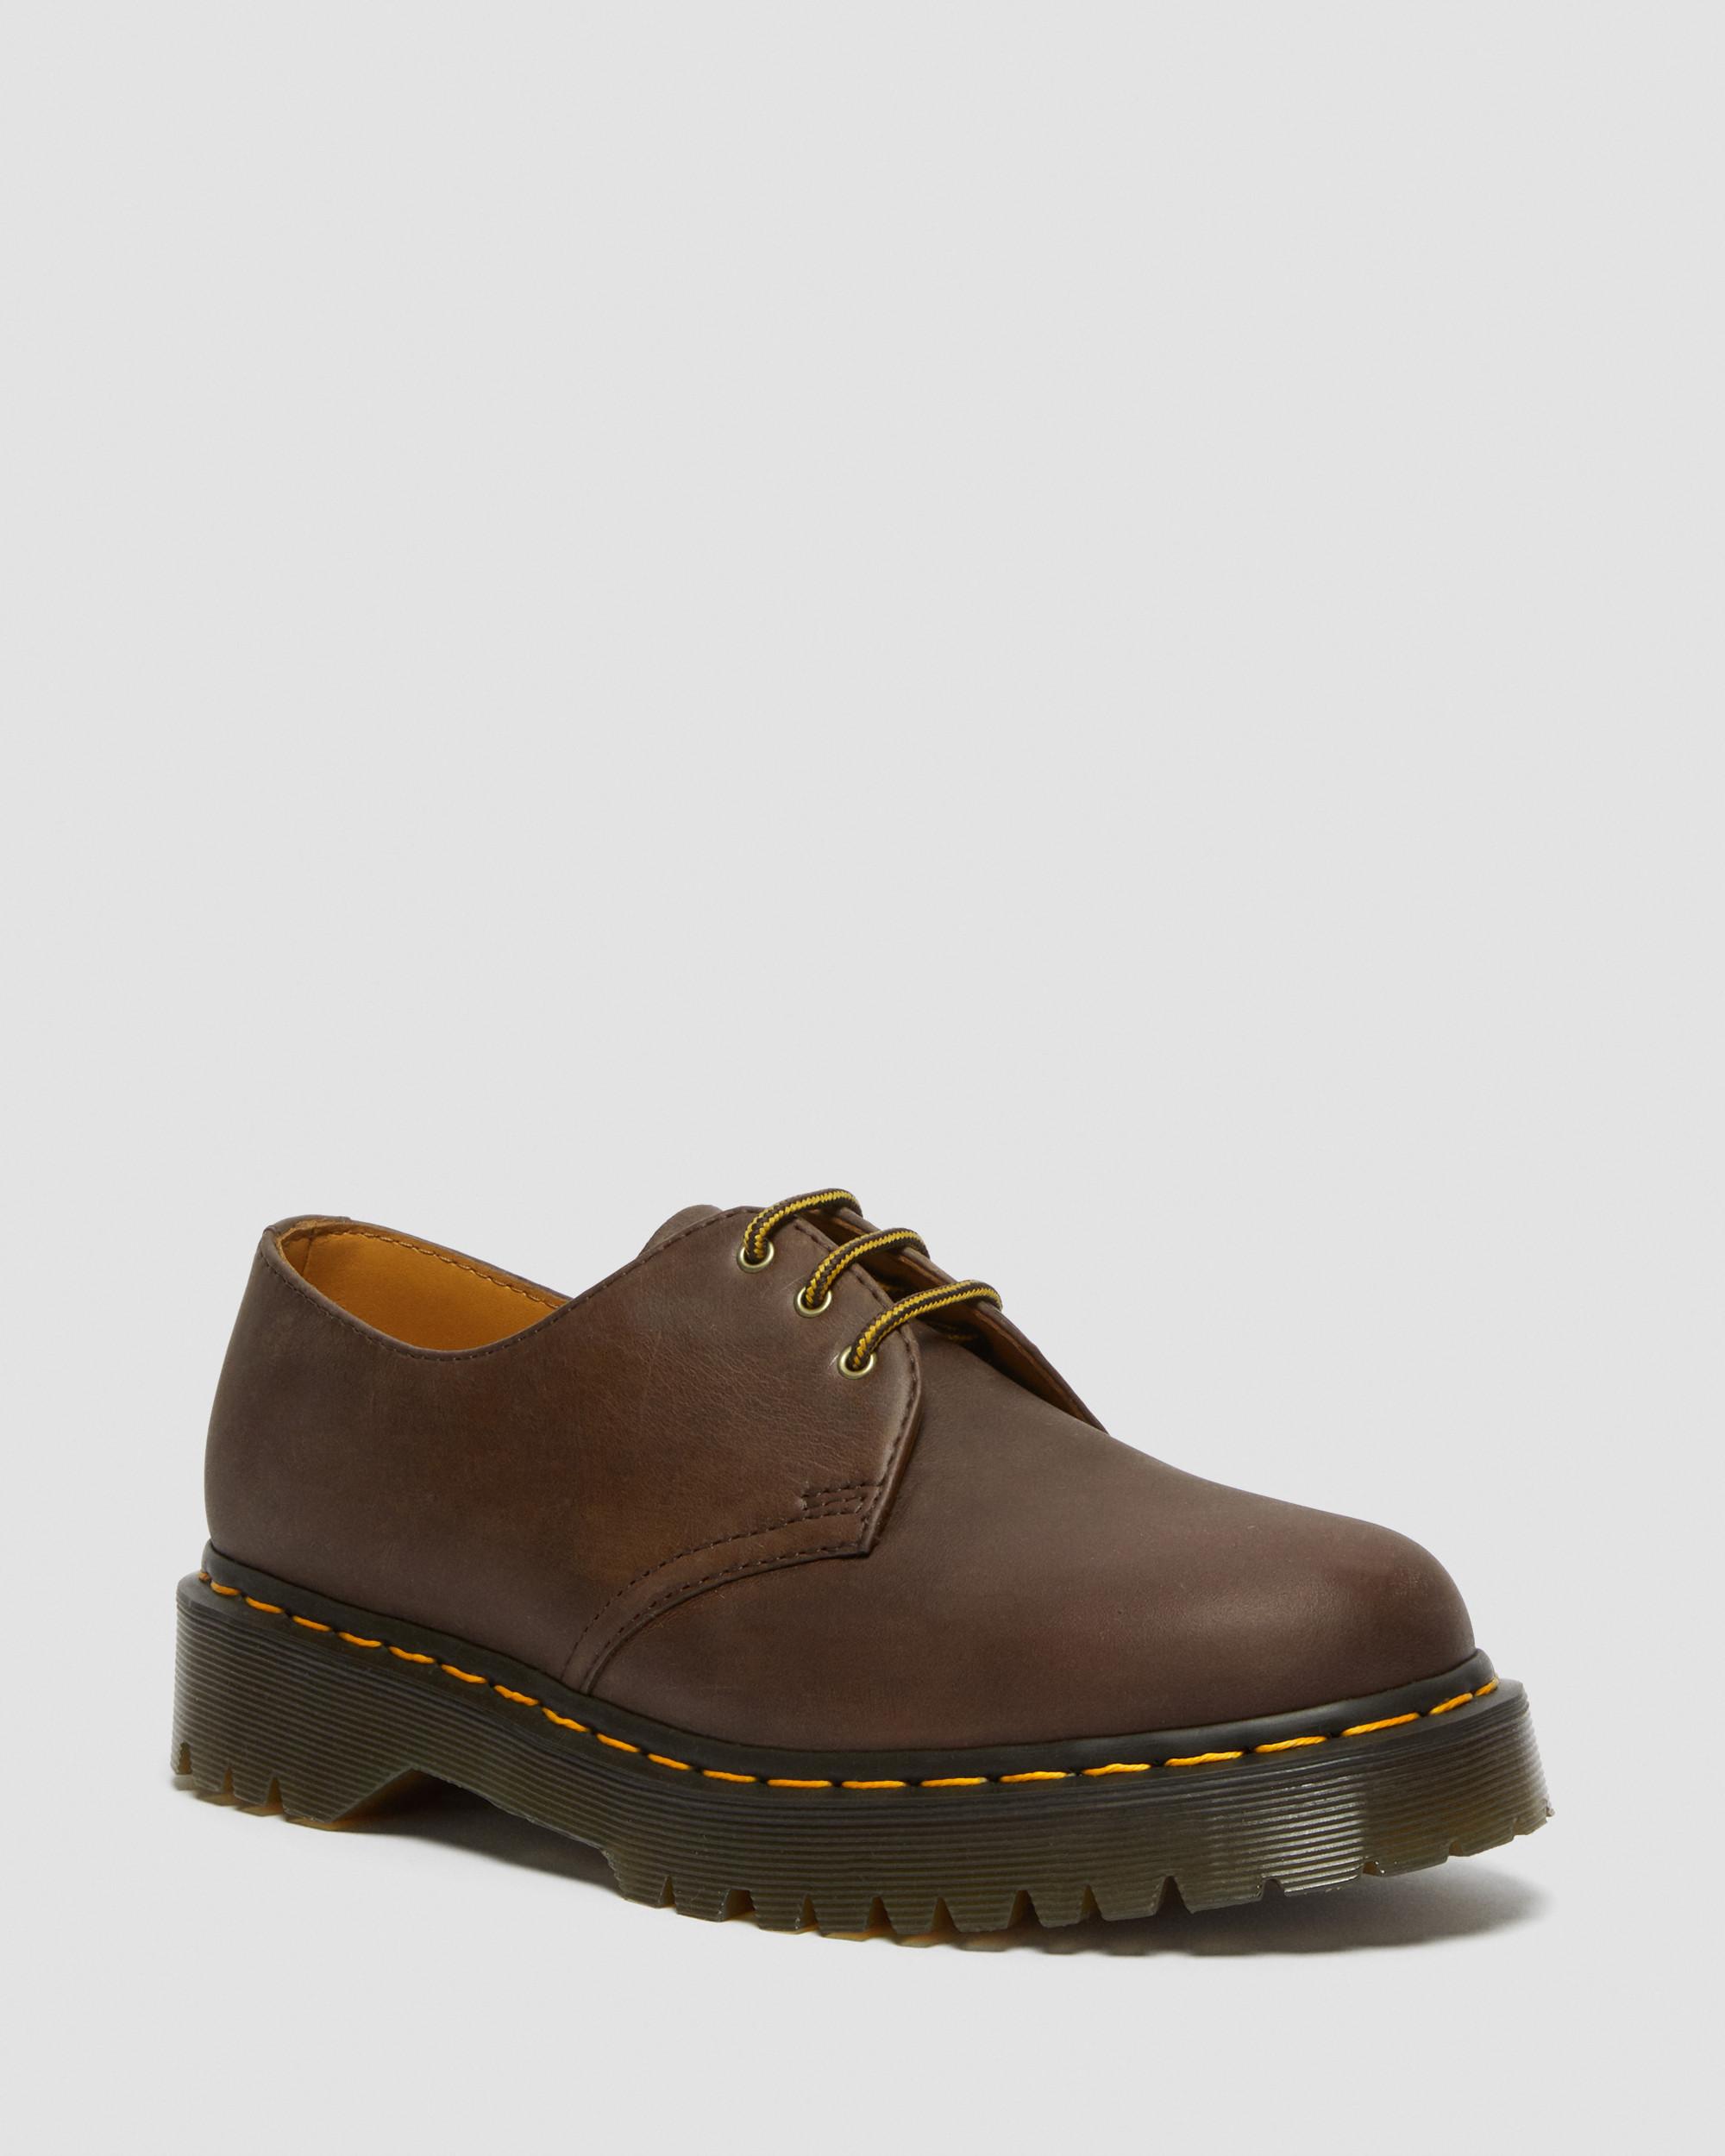 1461 Bex Crazy Horse Leather Oxford Shoes in Dark Brown